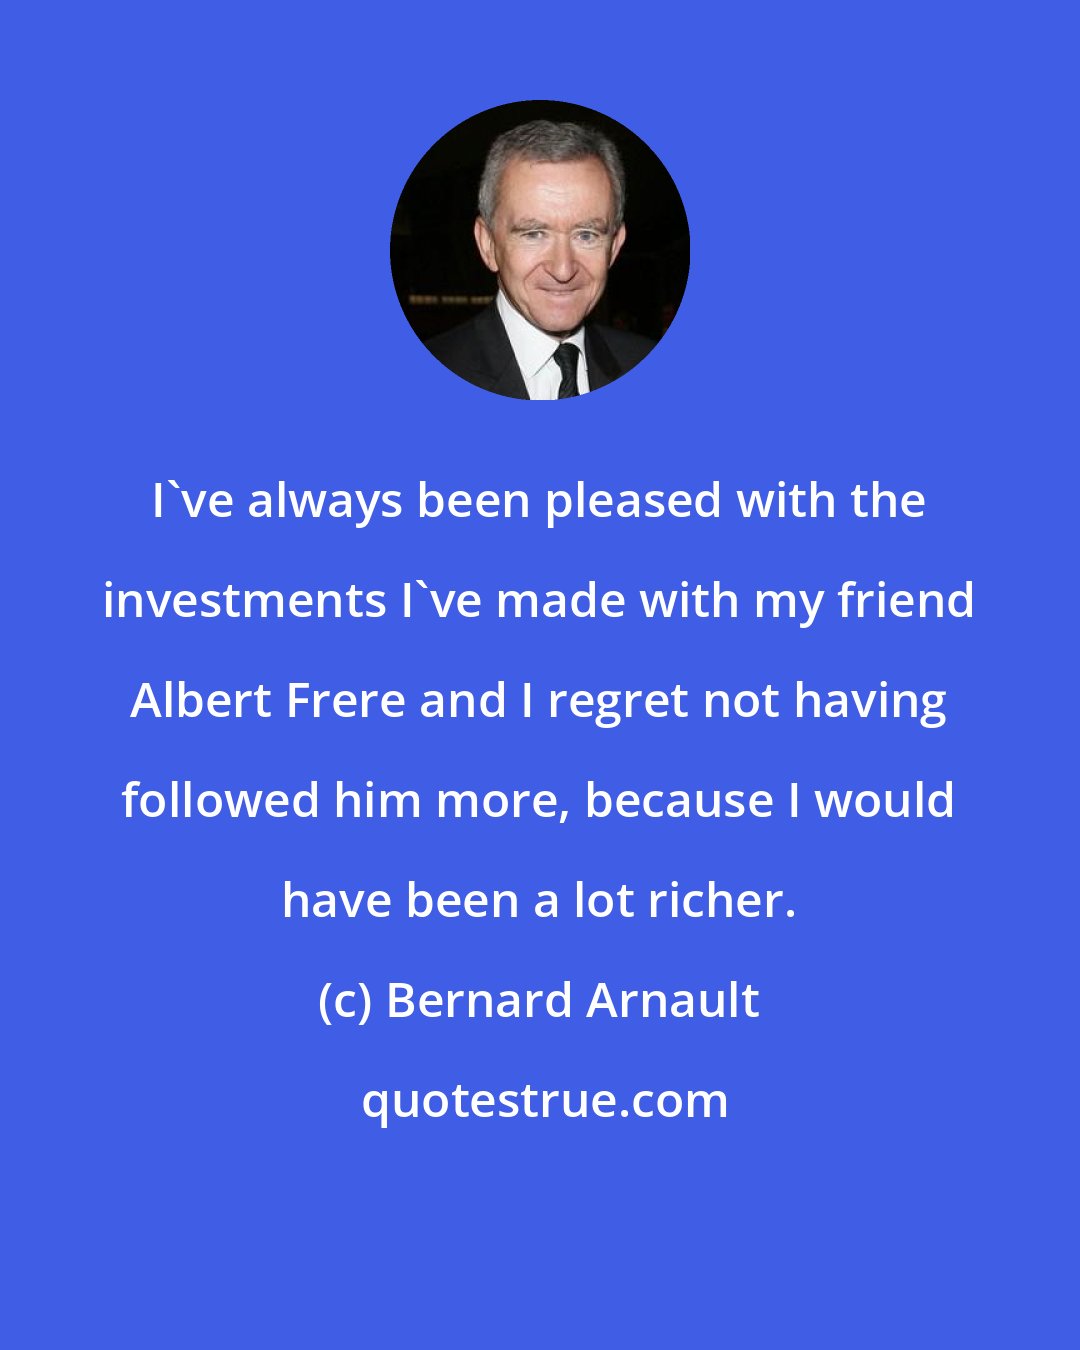 Bernard Arnault: I've always been pleased with the investments I've made with my friend Albert Frere and I regret not having followed him more, because I would have been a lot richer.